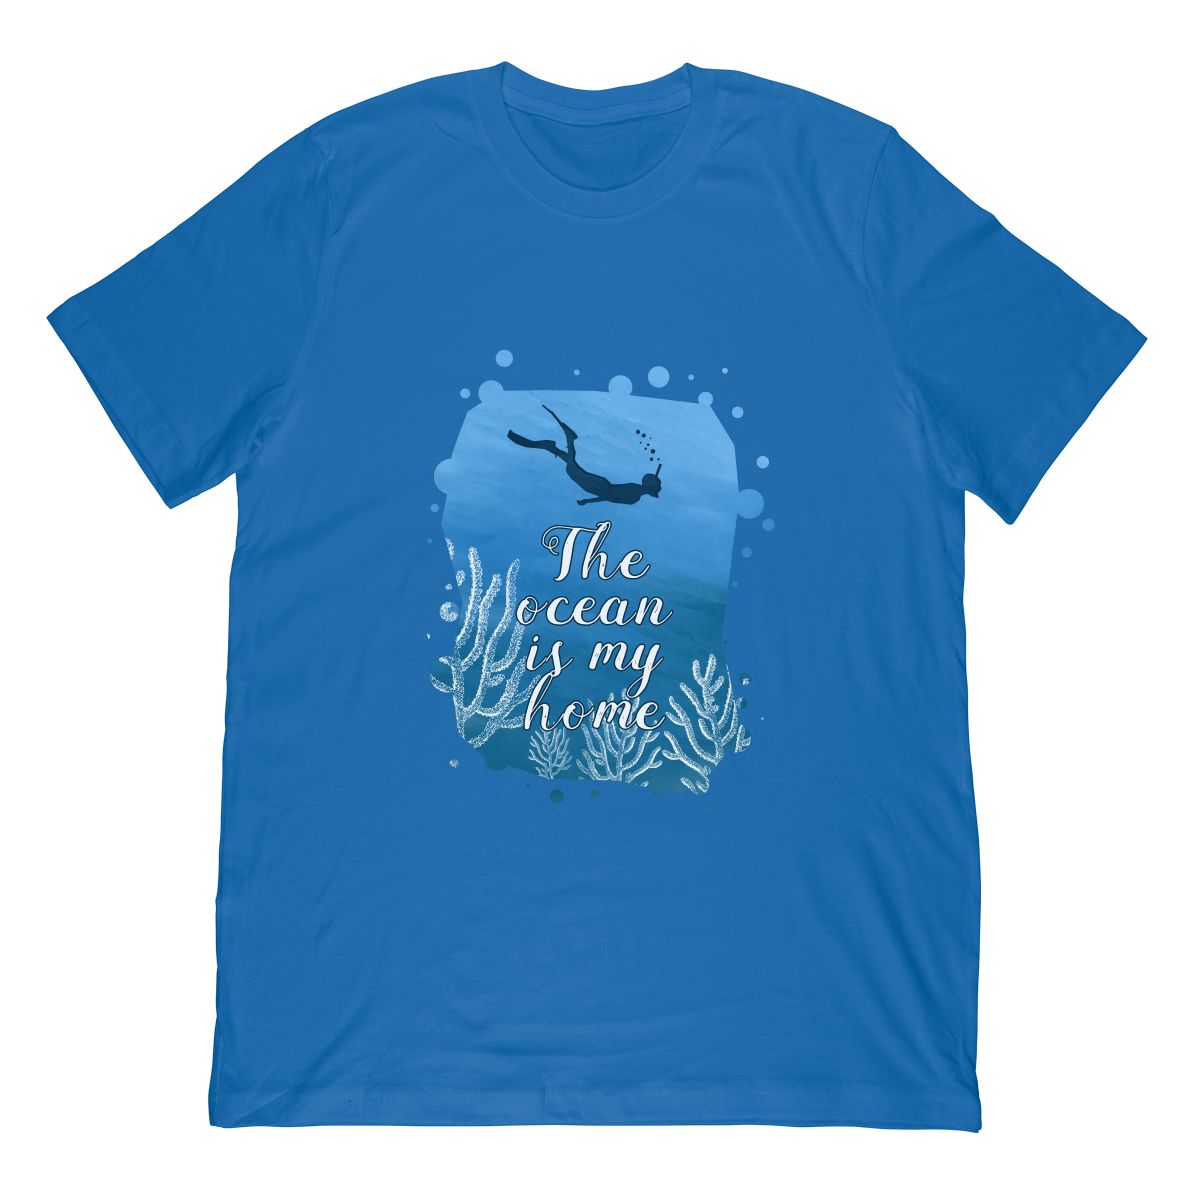 Snorkeling Shirt The Ocean is My Home